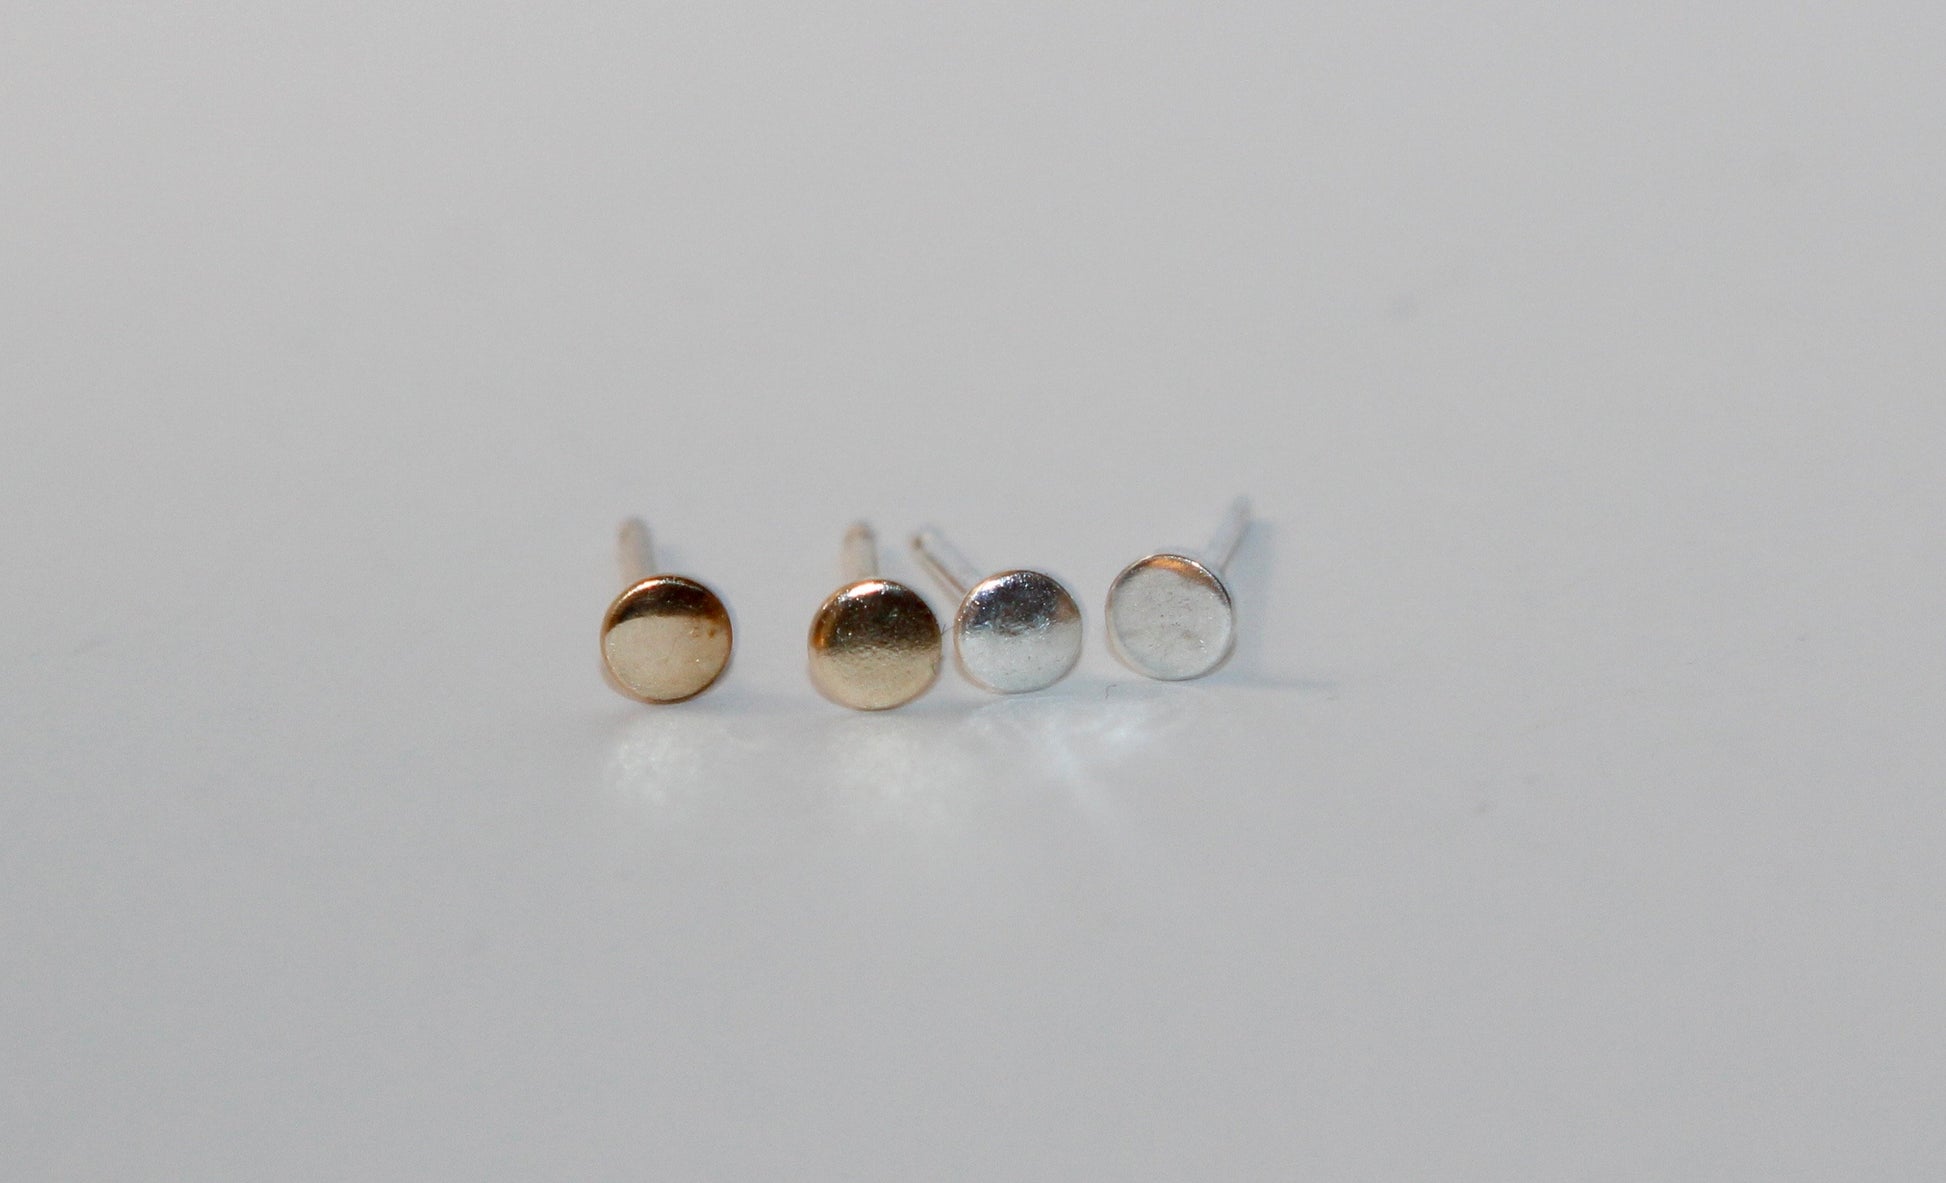 Tiny Dot Stud Earrings available in 14k Gold Fill and Sterling Silver